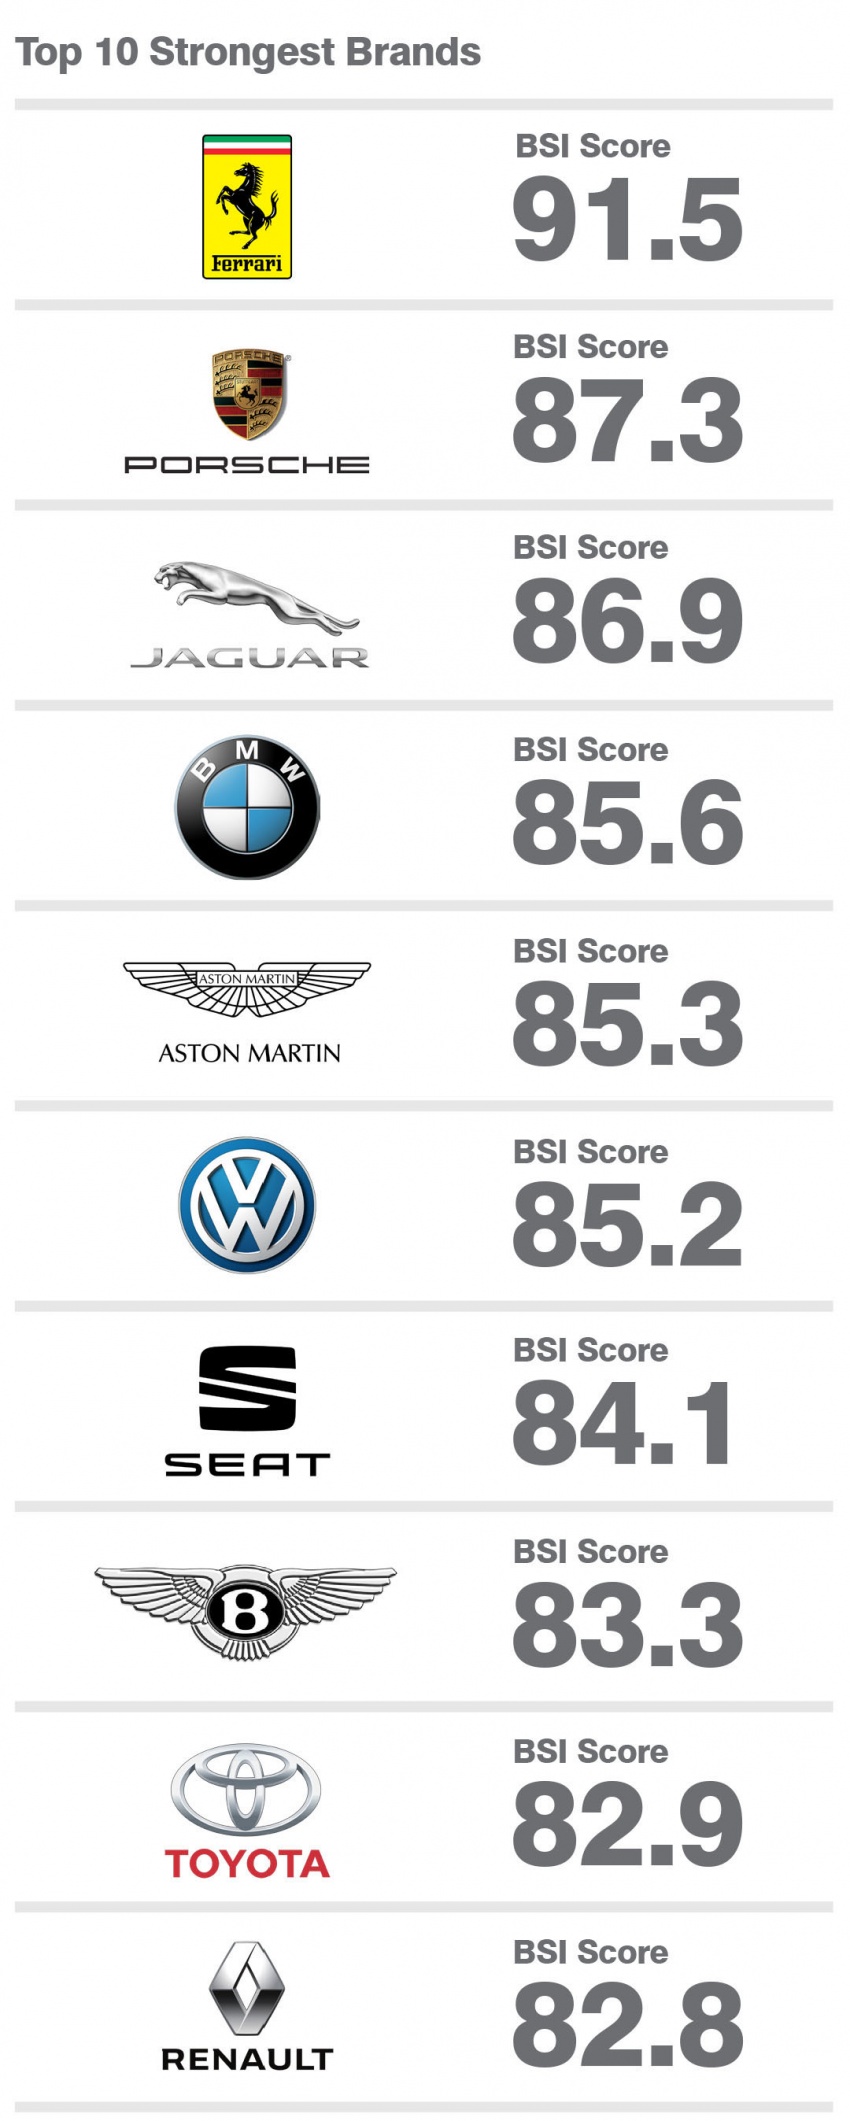 Mercedes-Benz is the world’s most valuable car brand, Ferrari the strongest brand – Brand Finance report 789631